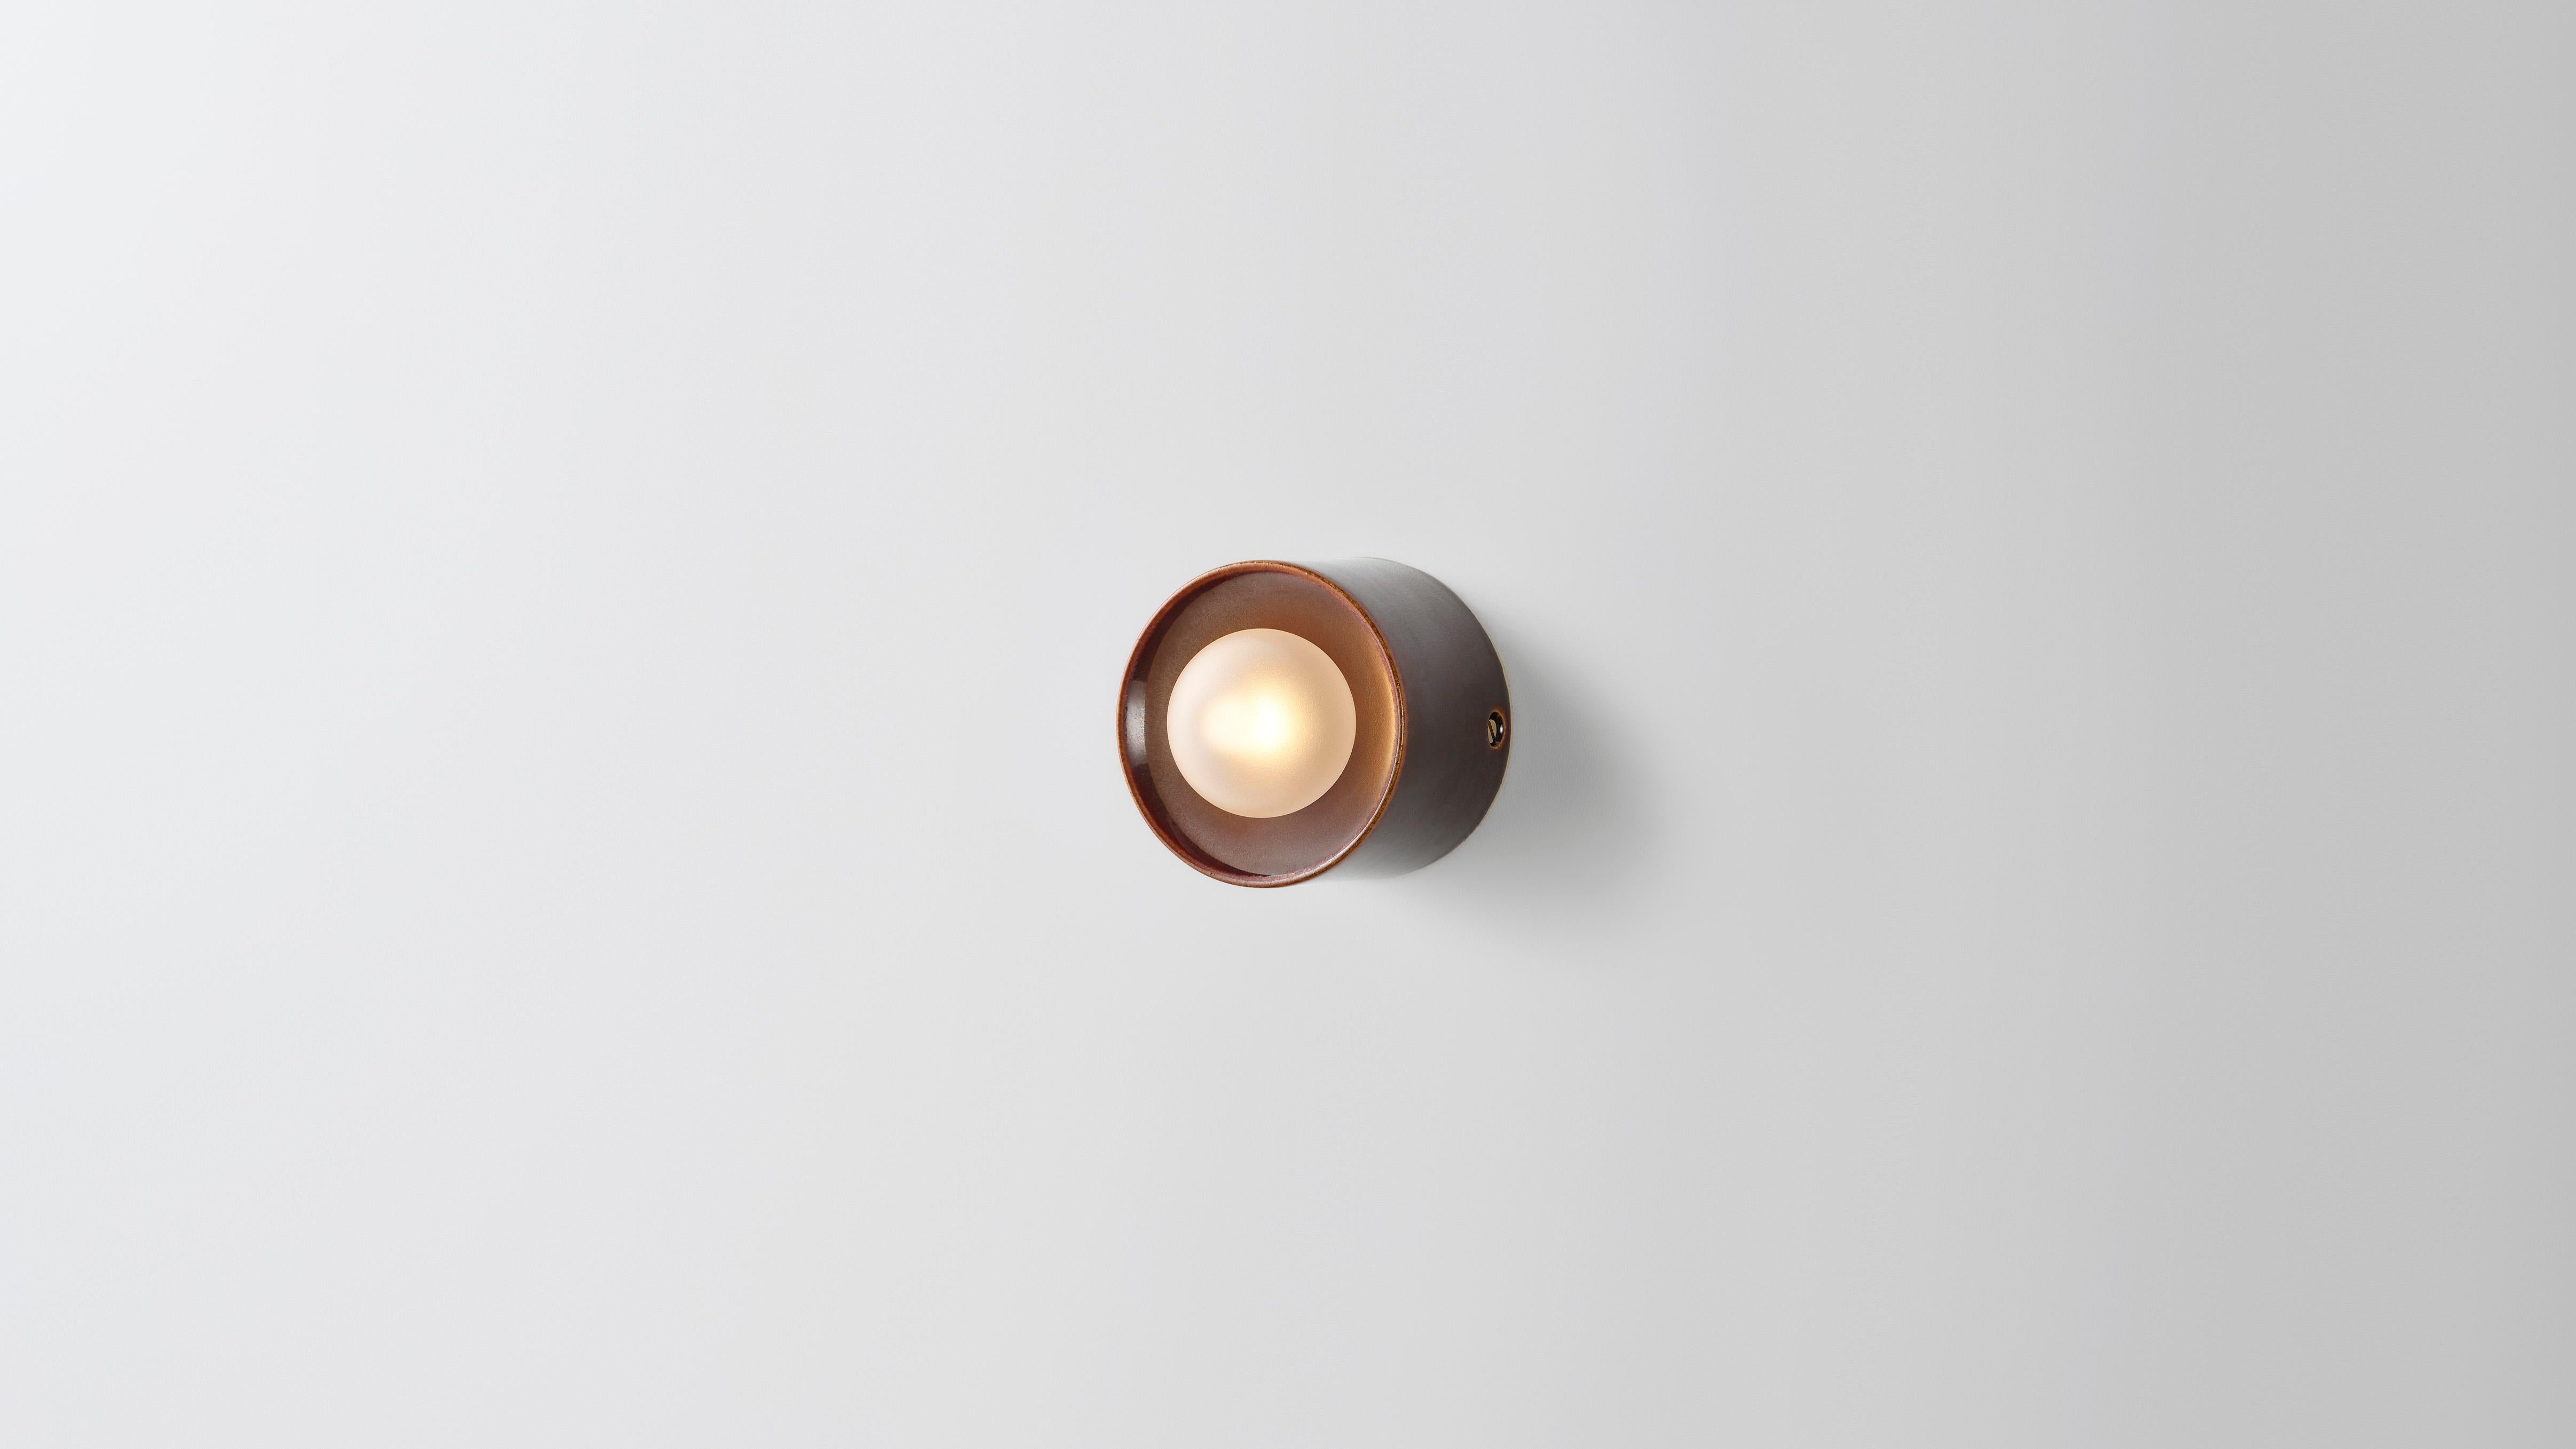 Anton Micro in brown ceramic by Volker Haug 
Anton series
Dimensions: W 8 H 8 D 6.3 cm
Materials: Cast Ceramic
Glaze: Brown
Lamp: G9 LED (240V / 120V US). 12V option available
Glass Bulb : 4.5 cm ø, Frosted
Weight : 1kg

Anton Micro is the smallest